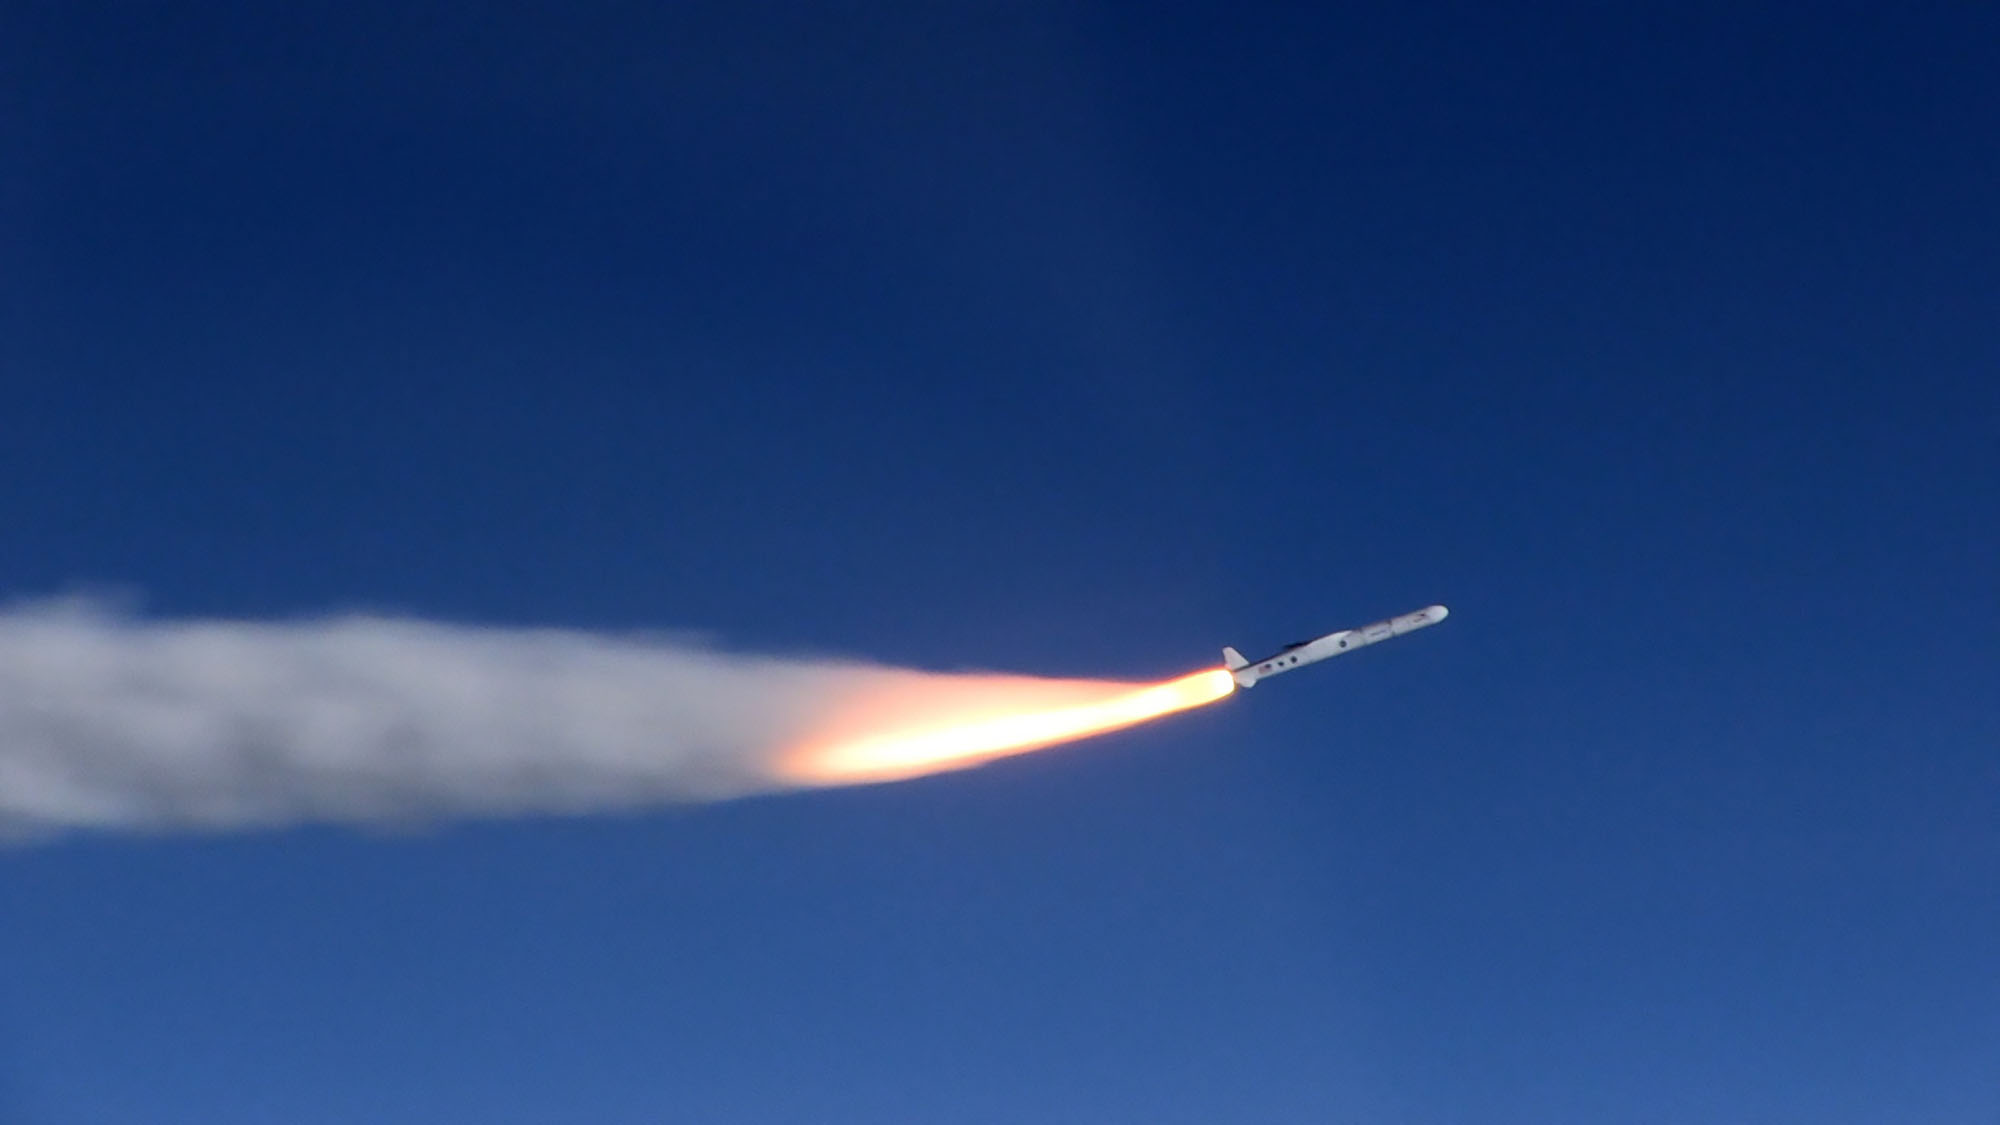 A rocket blasting off in blue sky with a plume